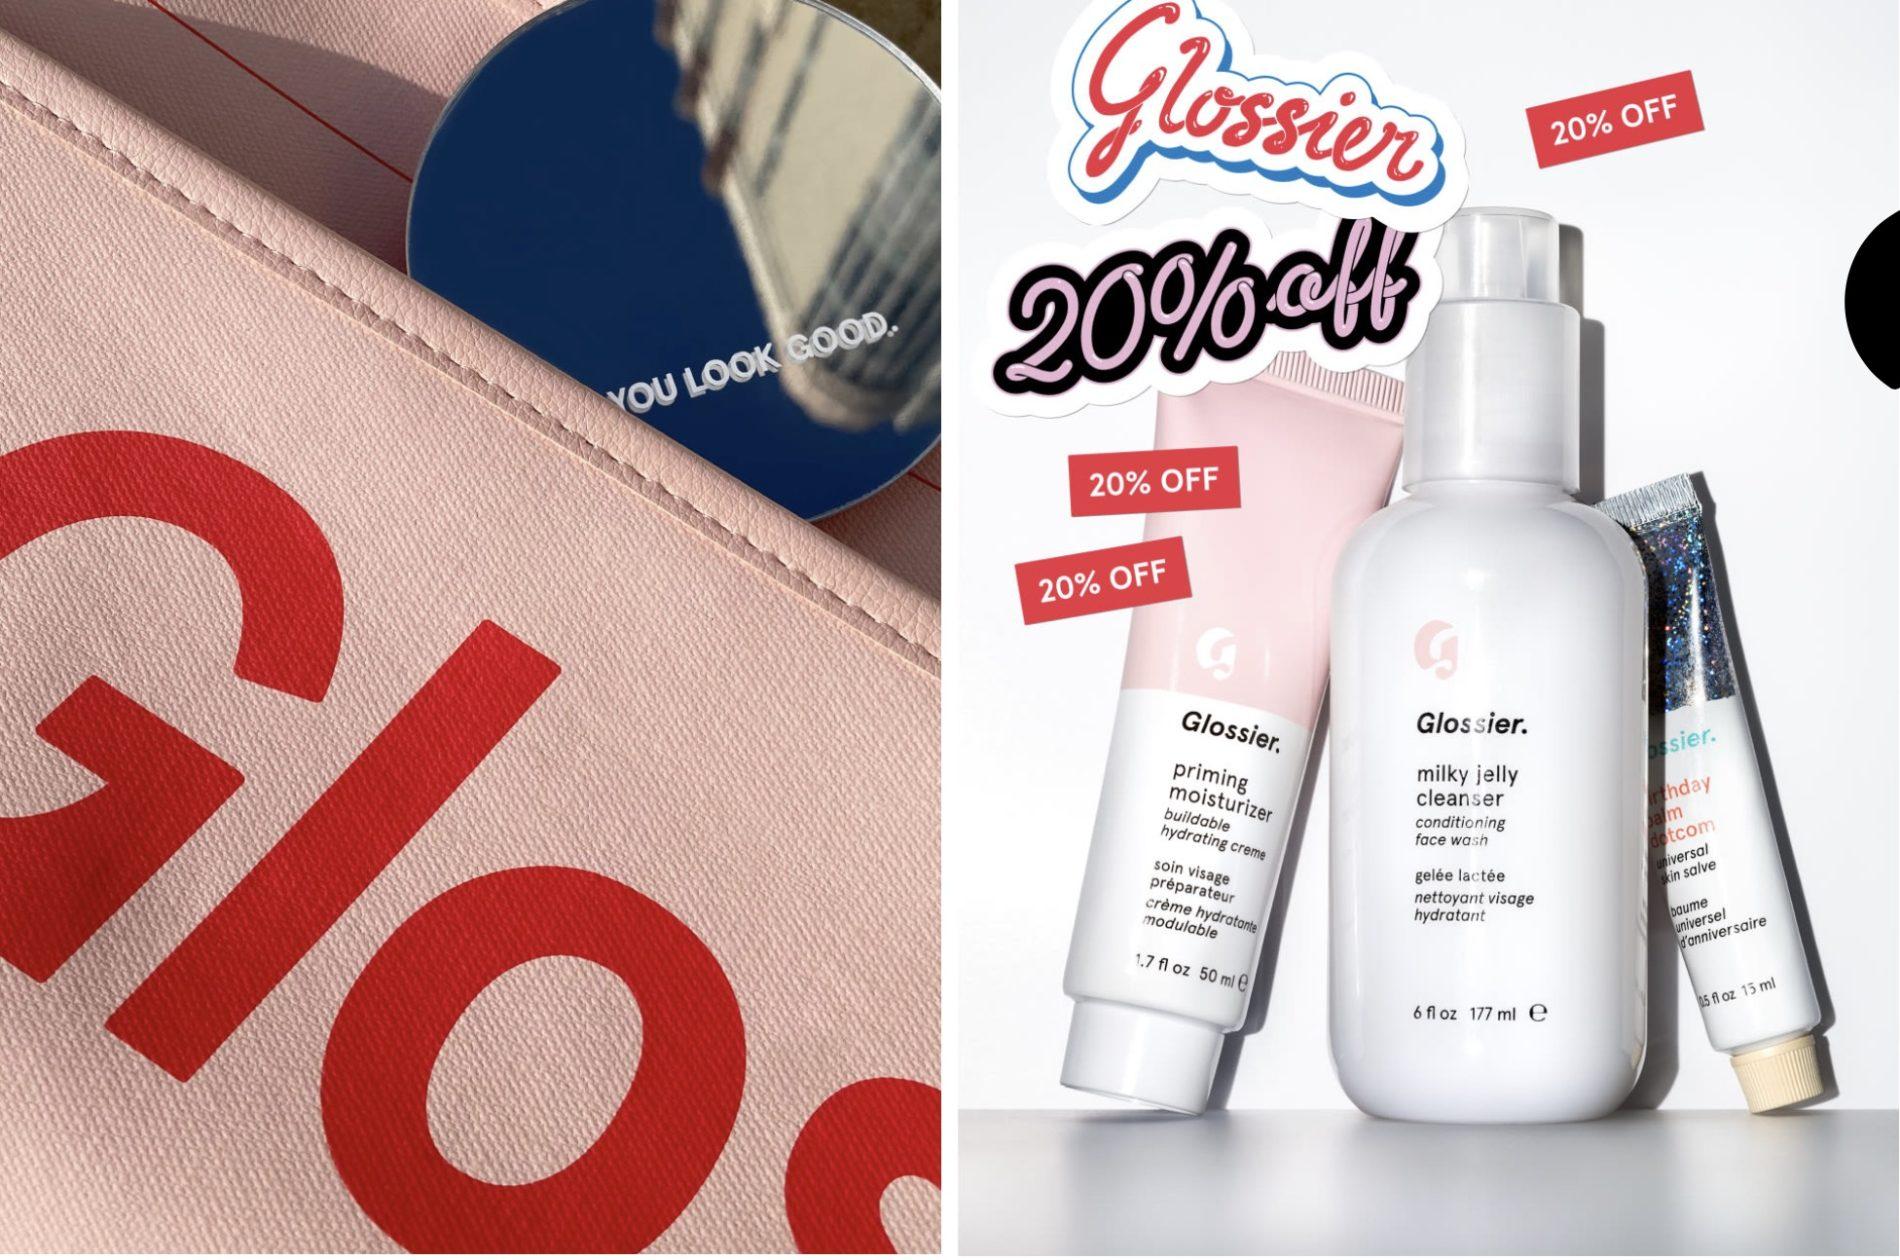  Glossier Black Friday – Save 20% + Free Mirror with Orders of $60+